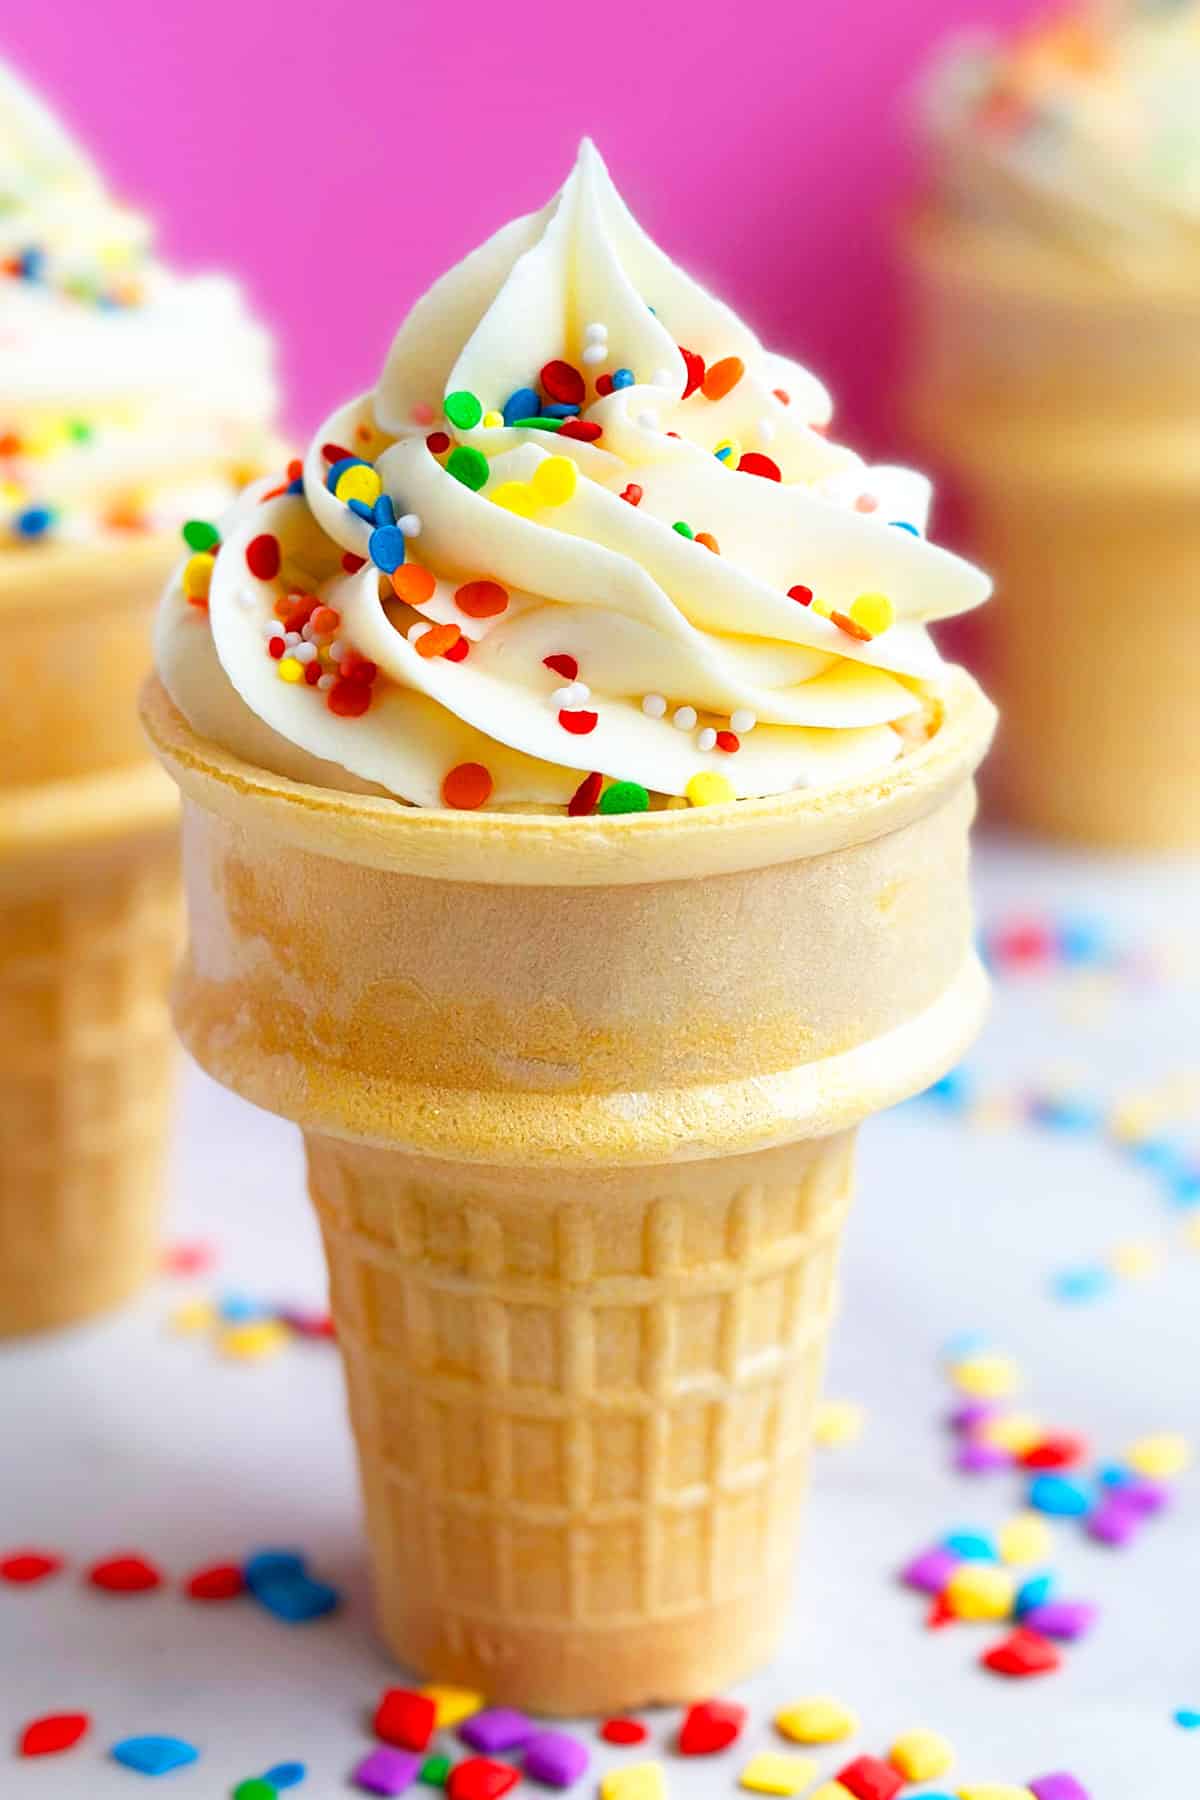 Easy Ice Cream Cone Cupcakes With Cake Mix on White and Pink Background